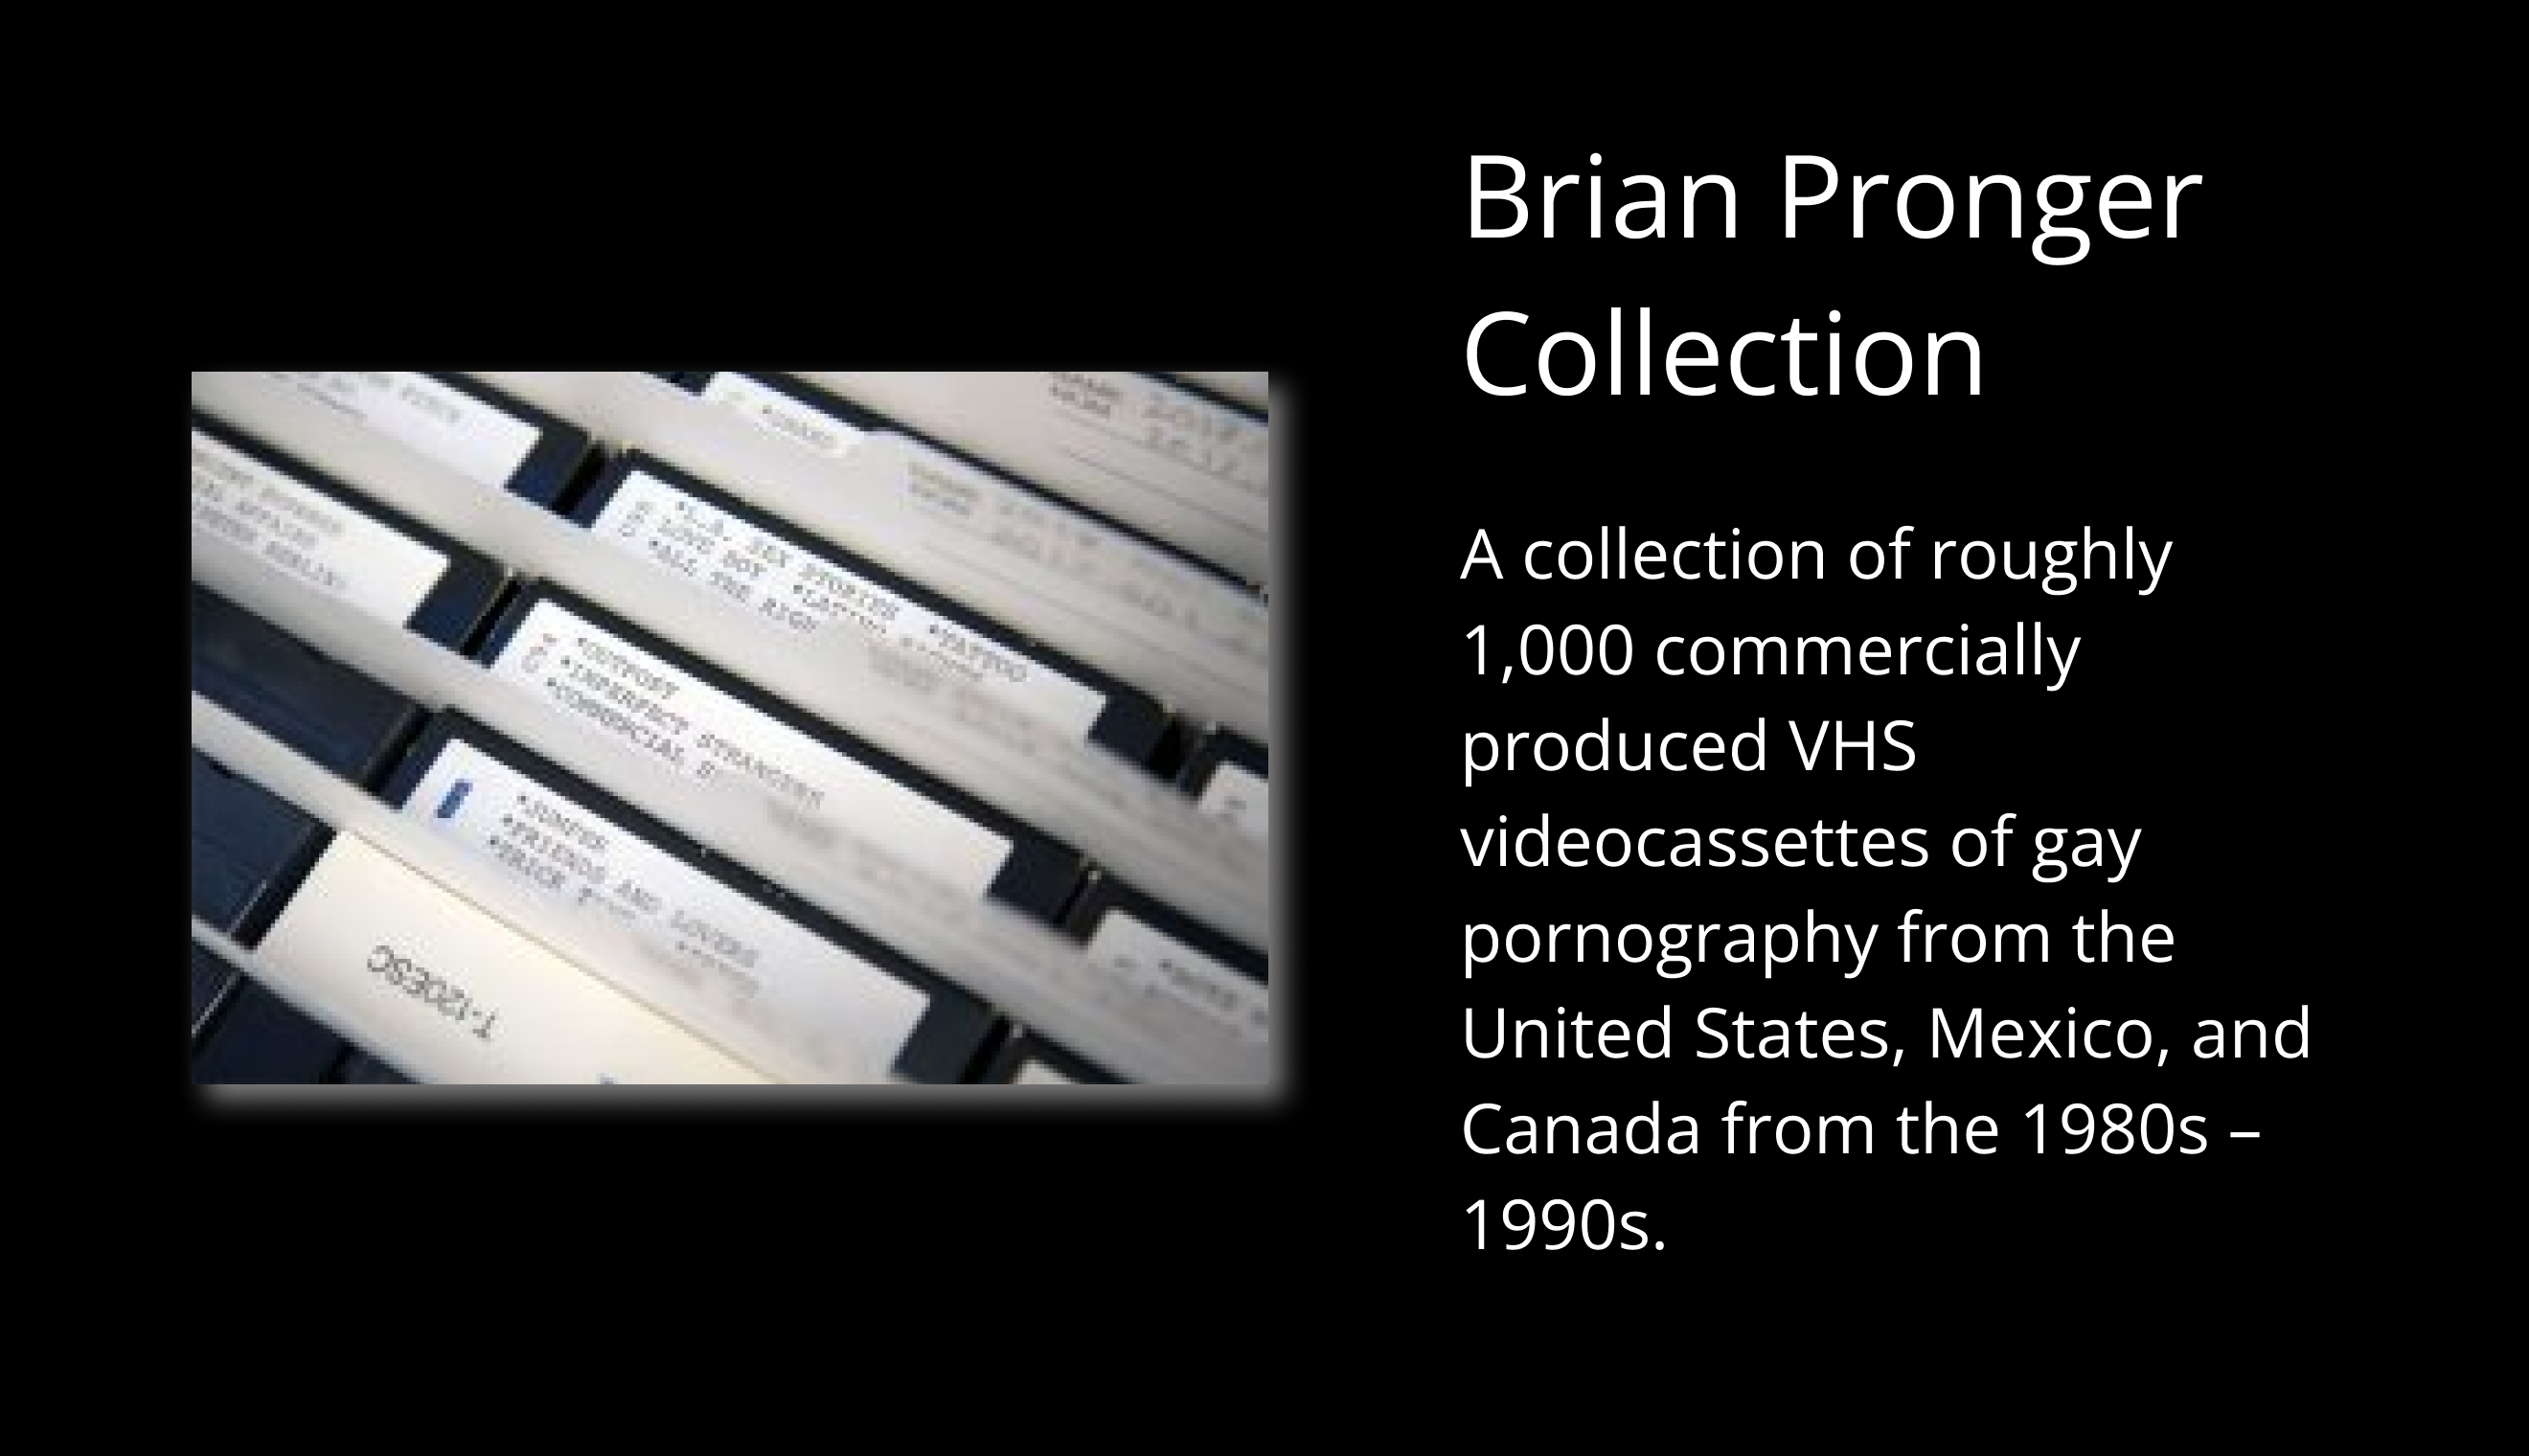 Slideshow image for Brian Pronger Collection Thumbnail and Description on black background